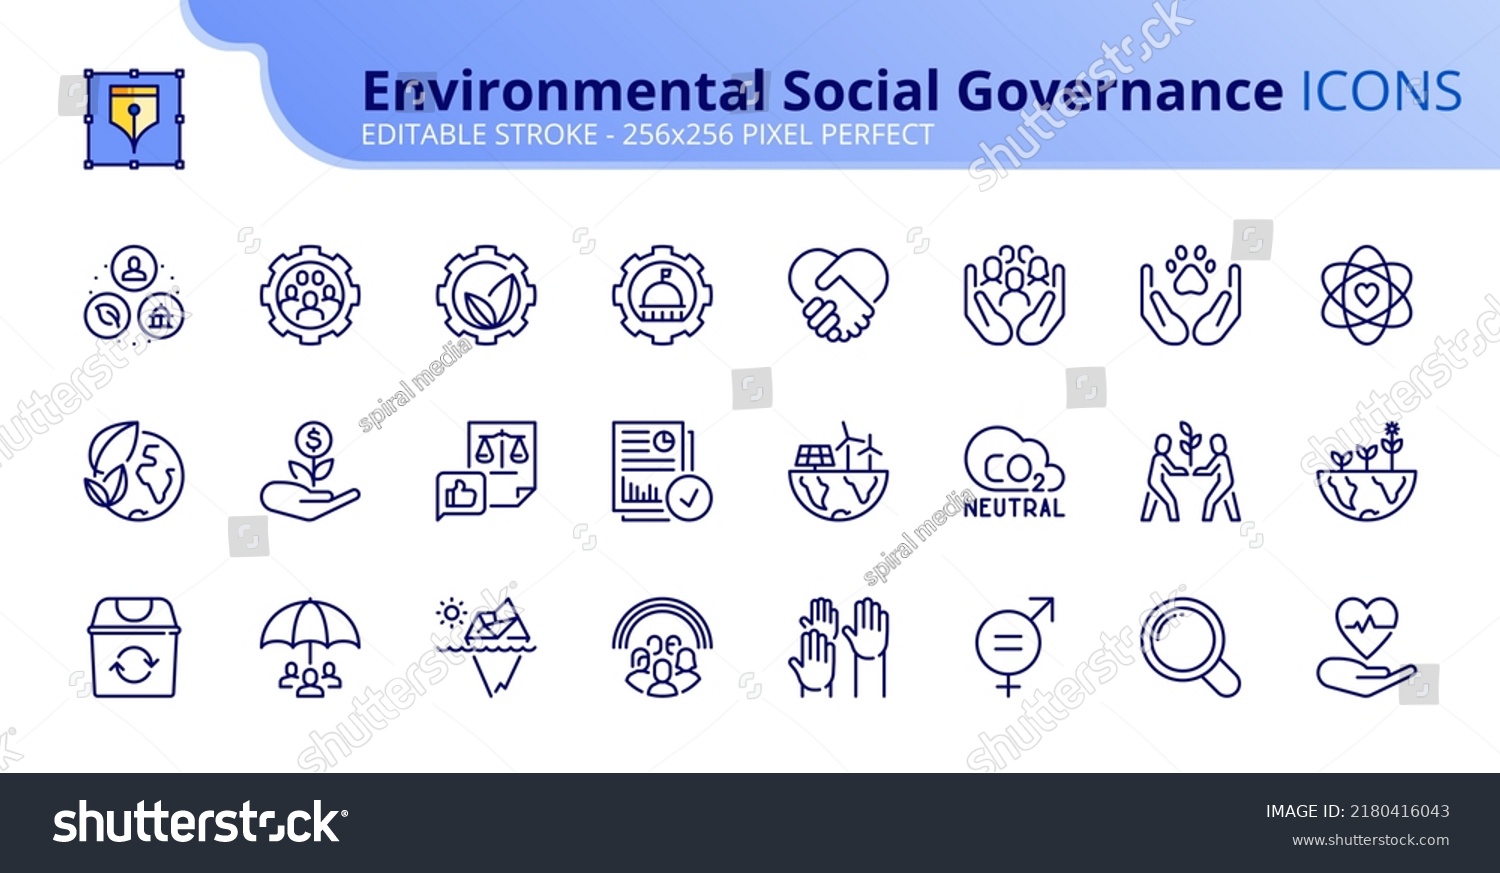 Line icons Environmental Social Governance. Contains such icons as climate crisis, sustainable development, diversity, human rights and responsible investment. Editable stroke Vector 256 pixel perfect #2180416043